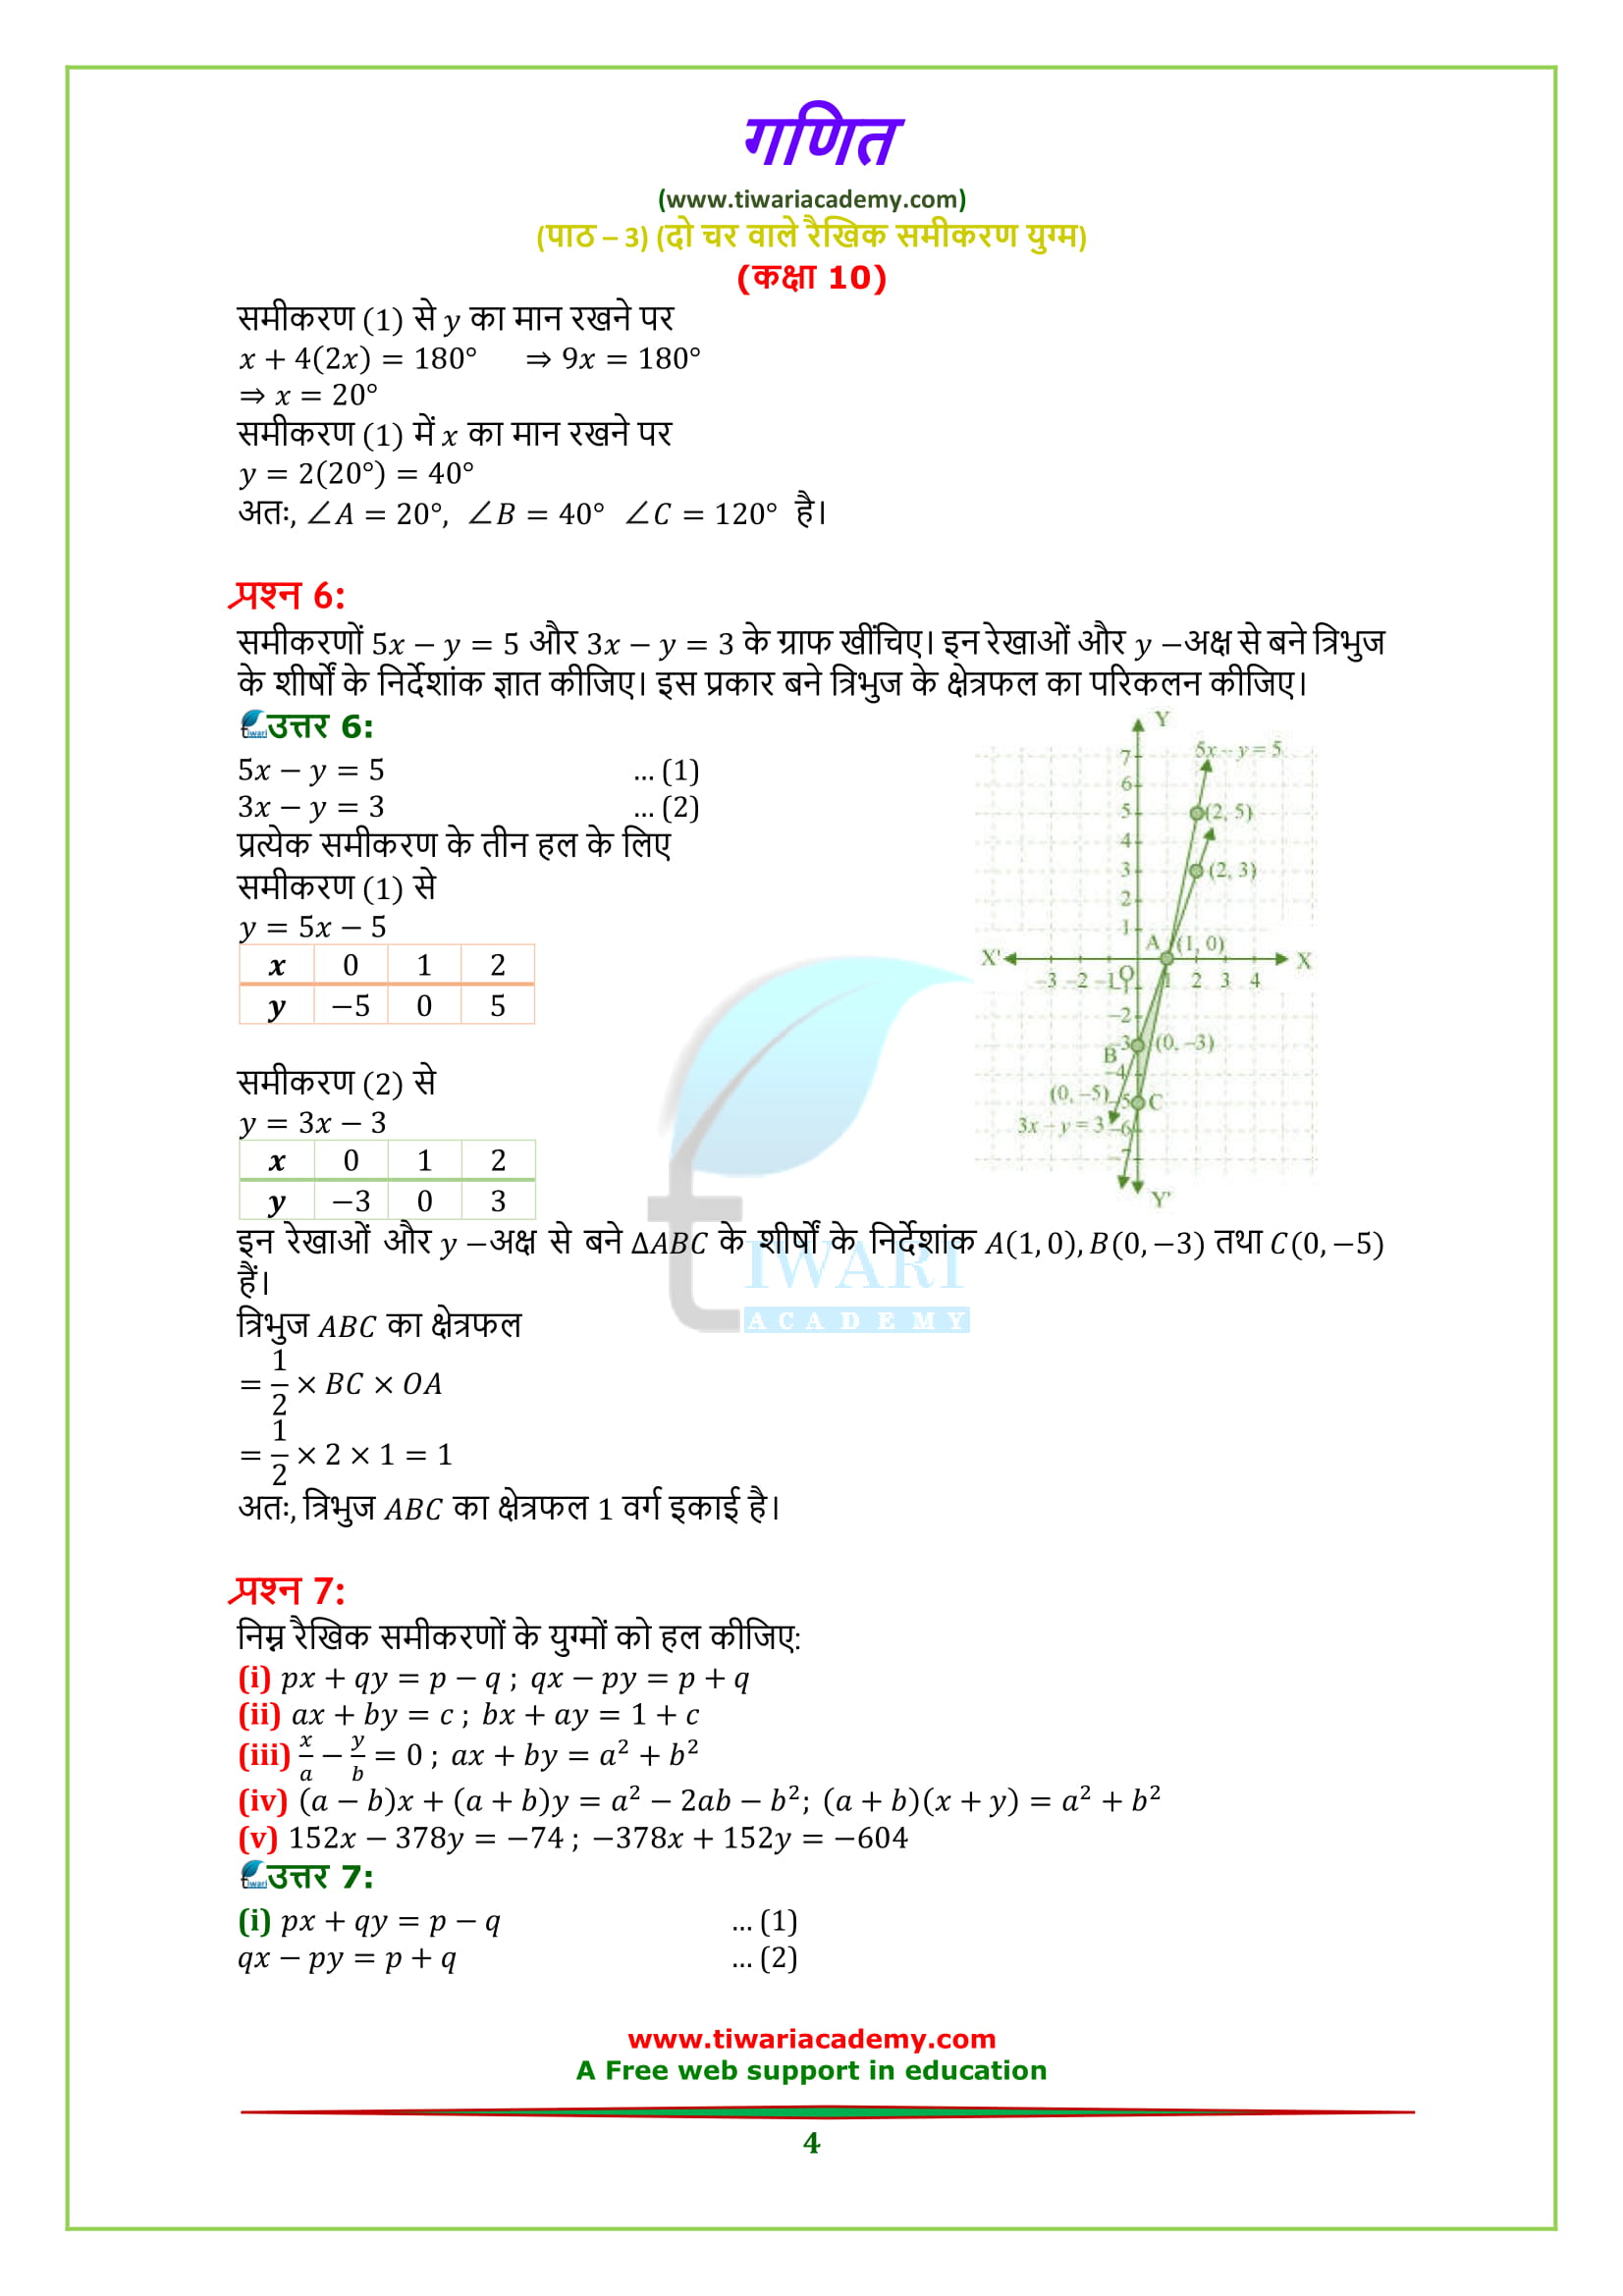 Class 10 maths chapter 3 optional exercise 3.7 solutions